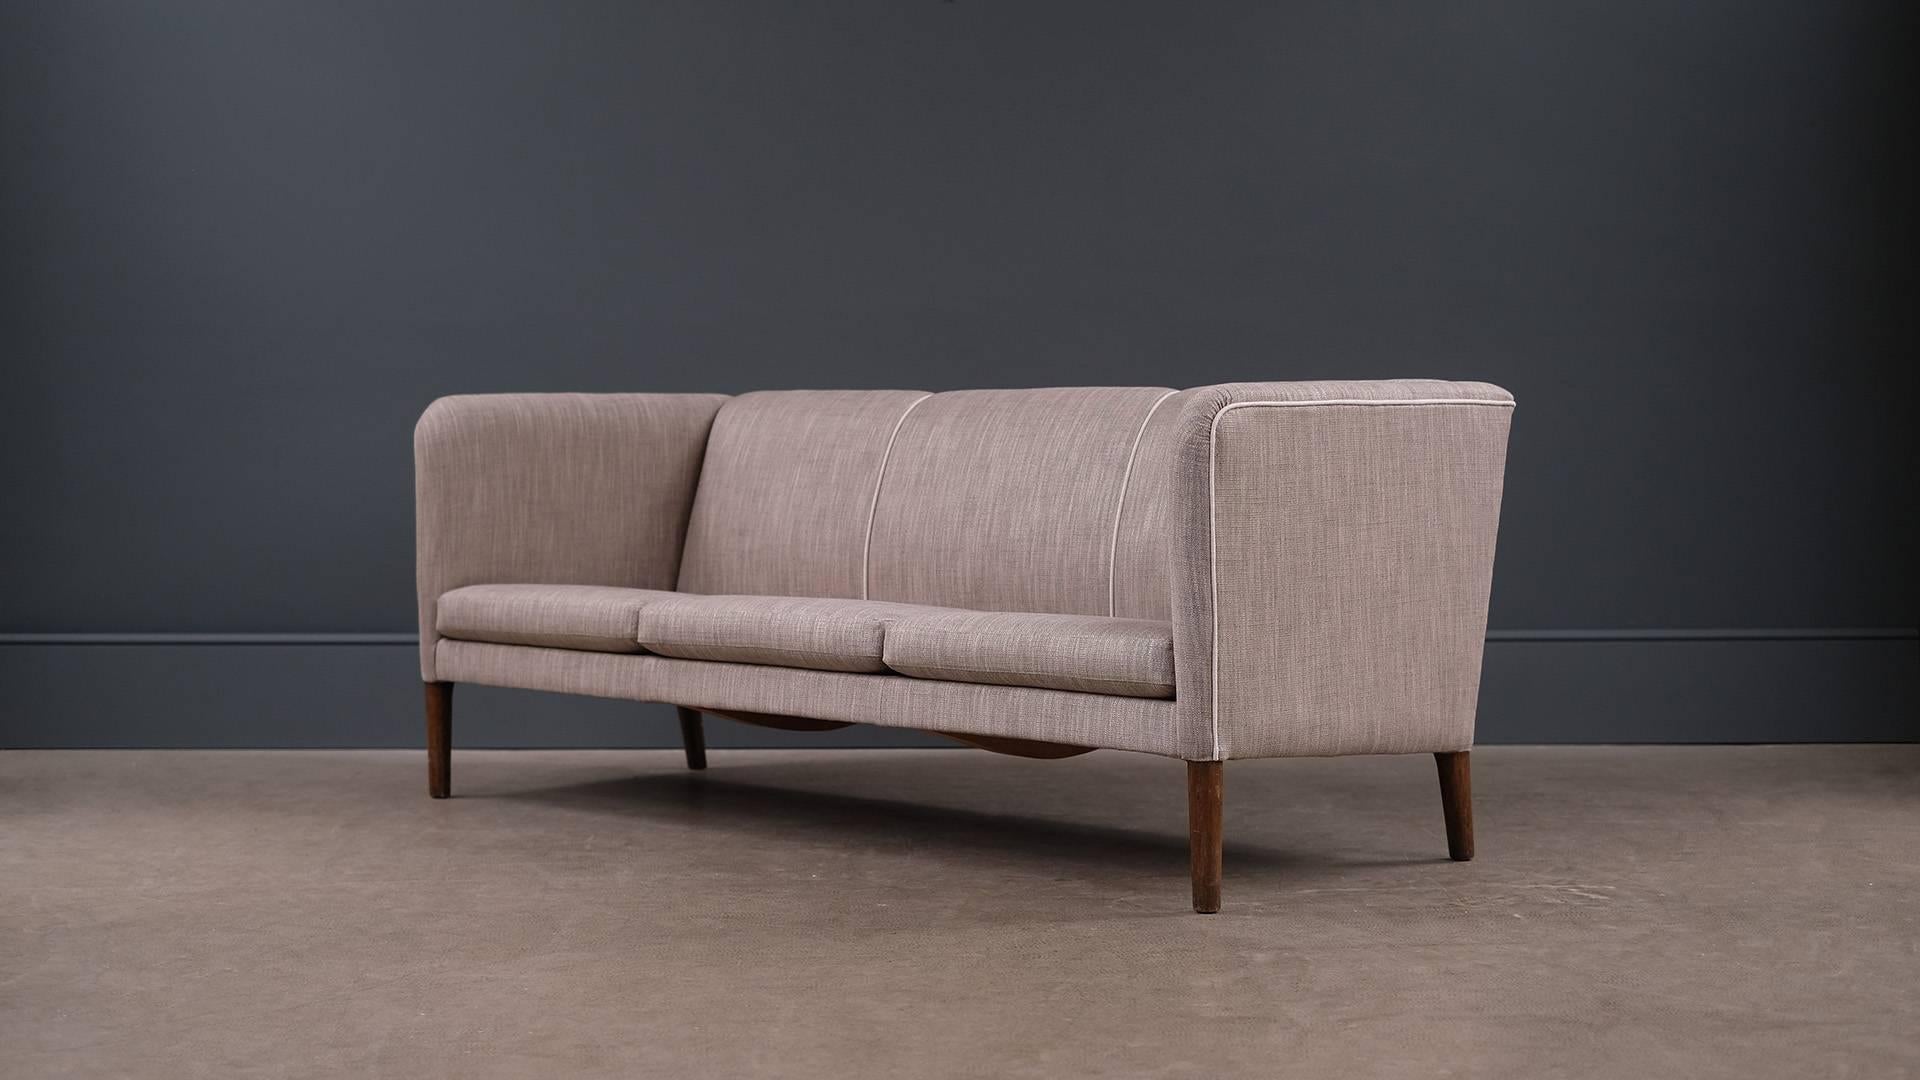 Ultra elegant Even Arm sofa designed by Hans Wegner for master cabinet maker AP Stolen, Denmark. Very comfortable sofa fully reconditioned and reupholstered in fabulous grey fabric with contrasting piping details. Great piece.